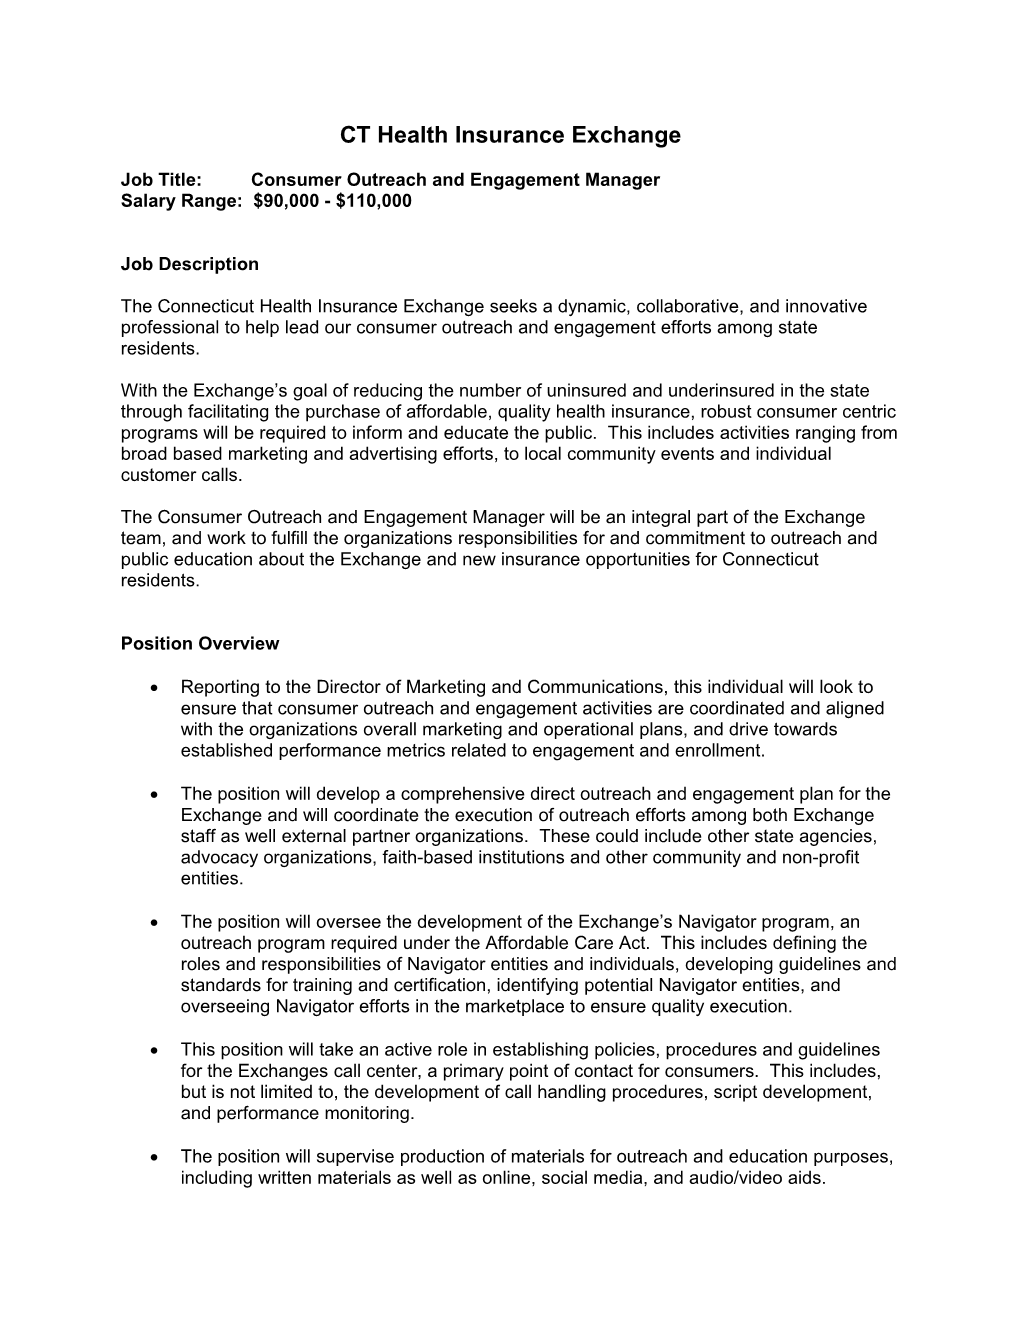 Job Title: Consumeroutreach and Engagement Manager